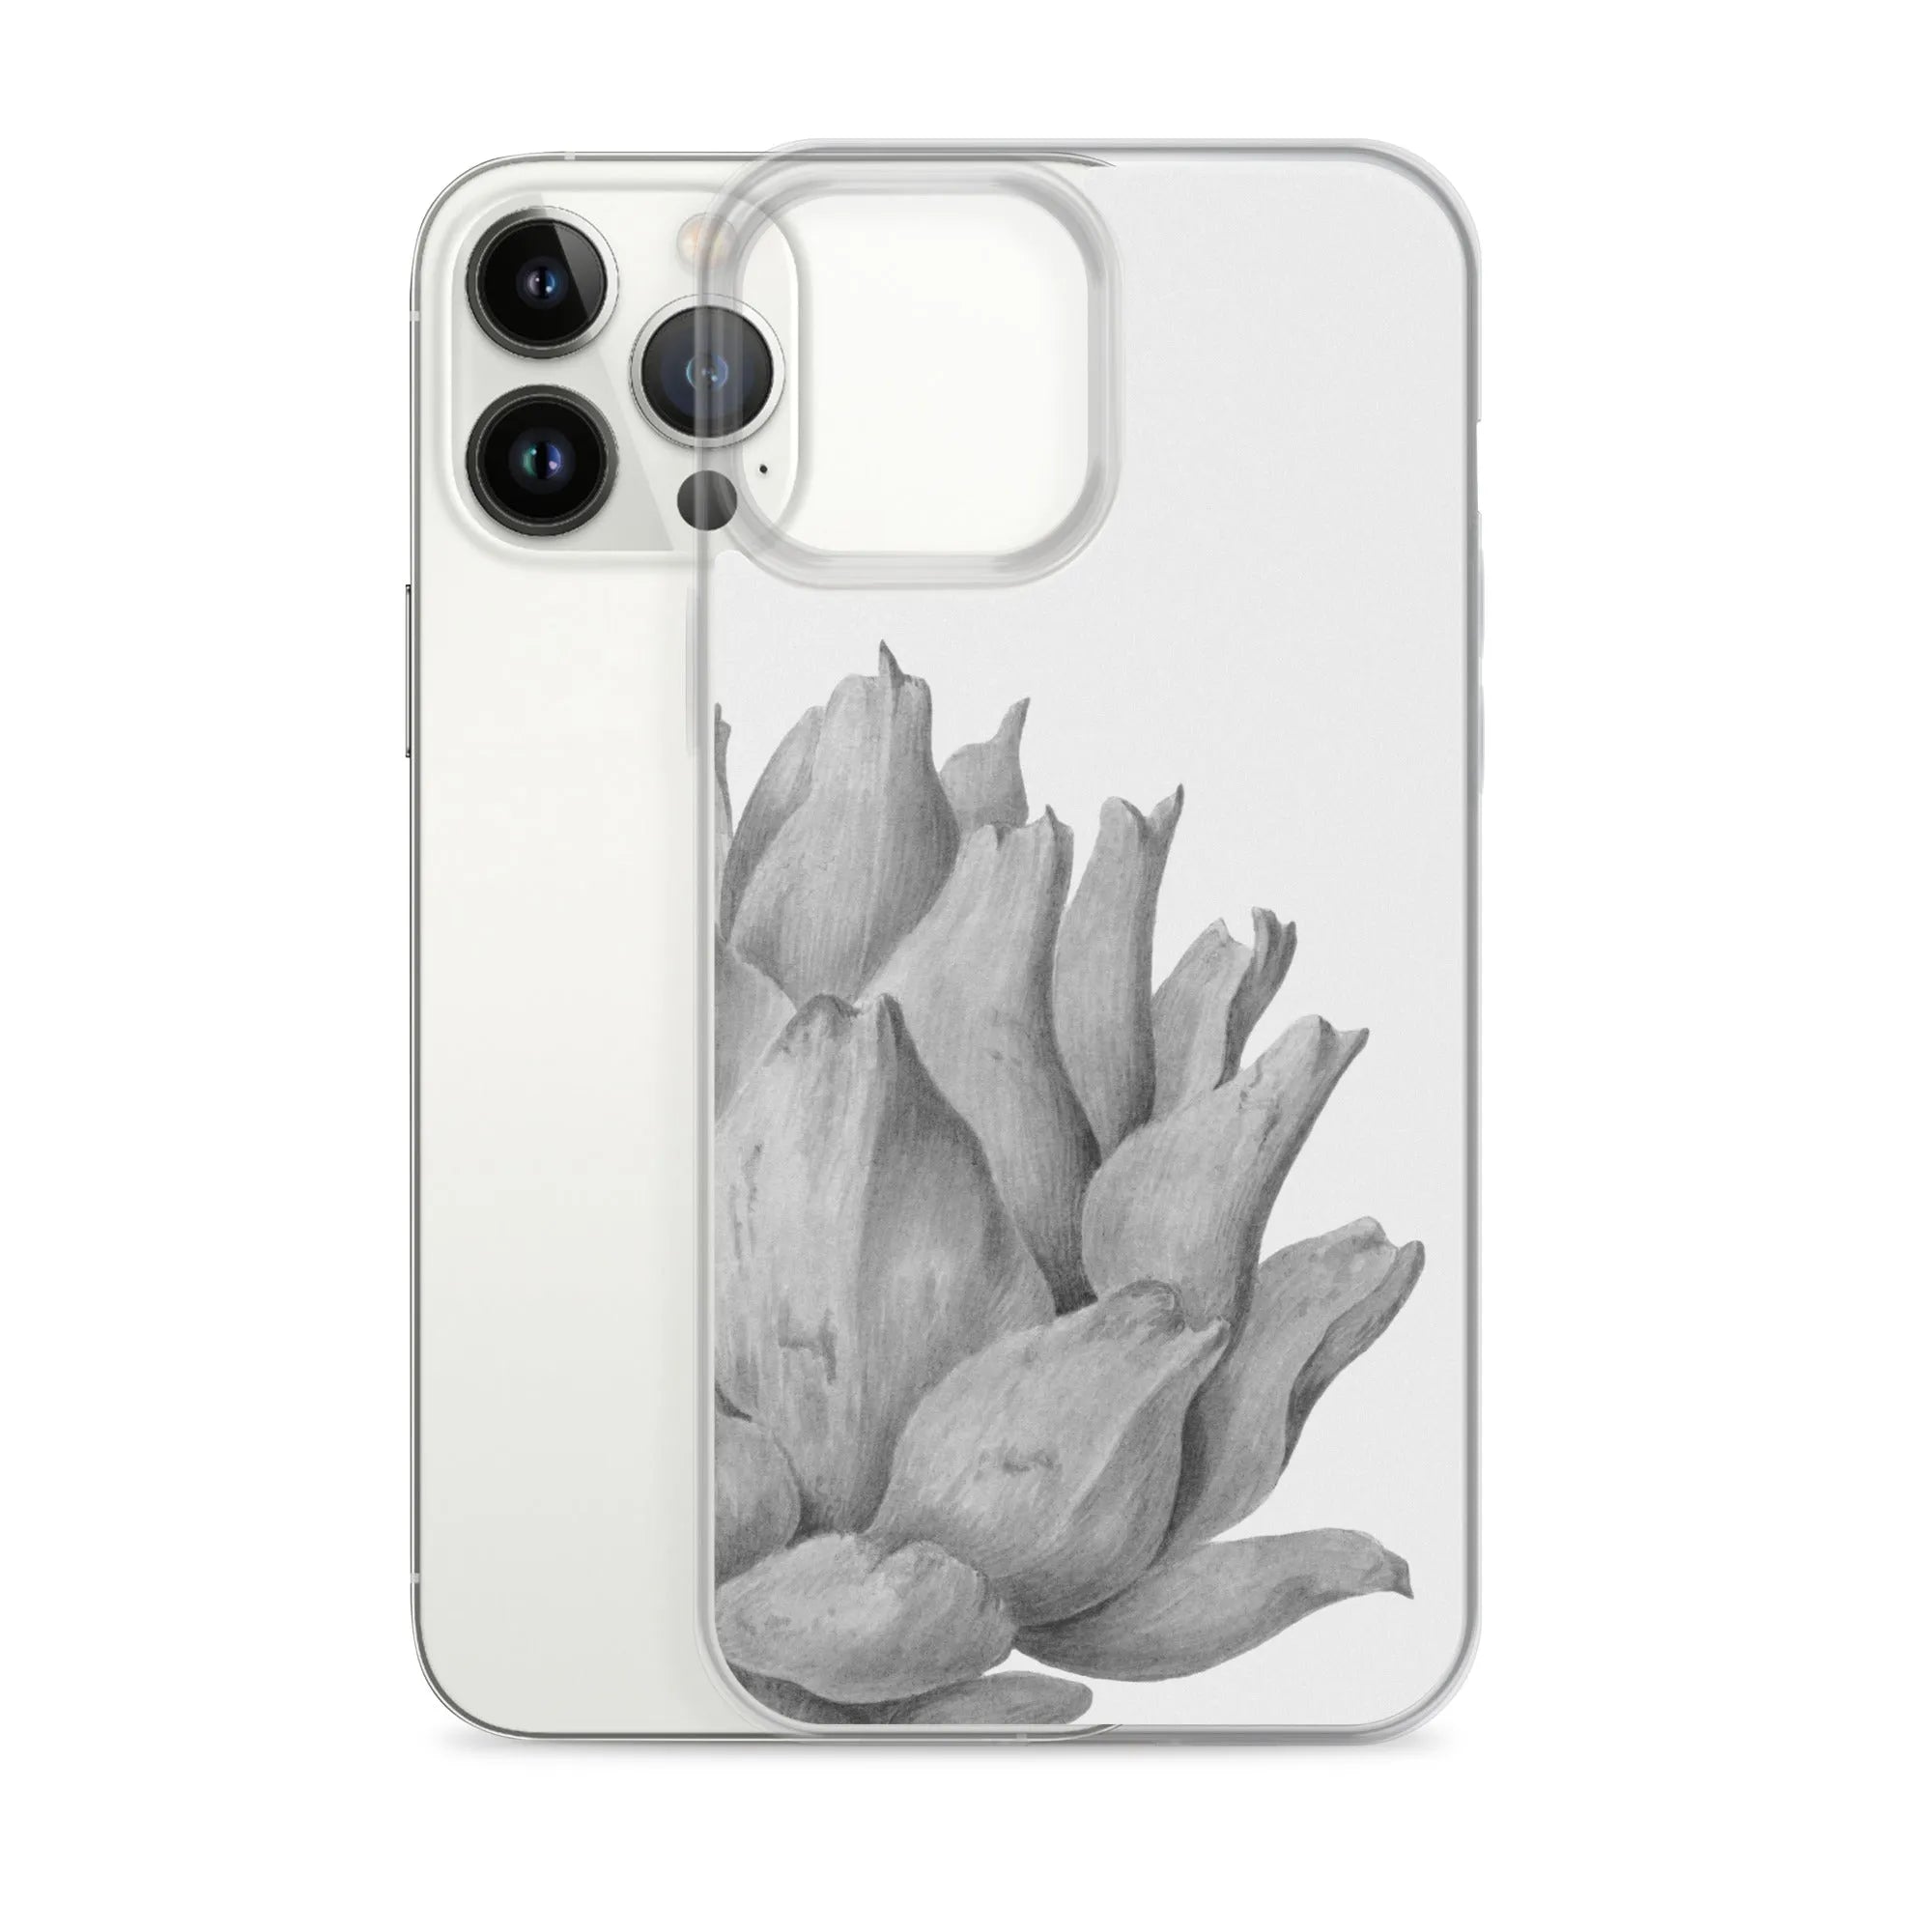 Heartichoke Botanical Art Iphone Case - Black And White - Iphone 13 Pro Max - Mobile Phone Cases - Aesthetic Art